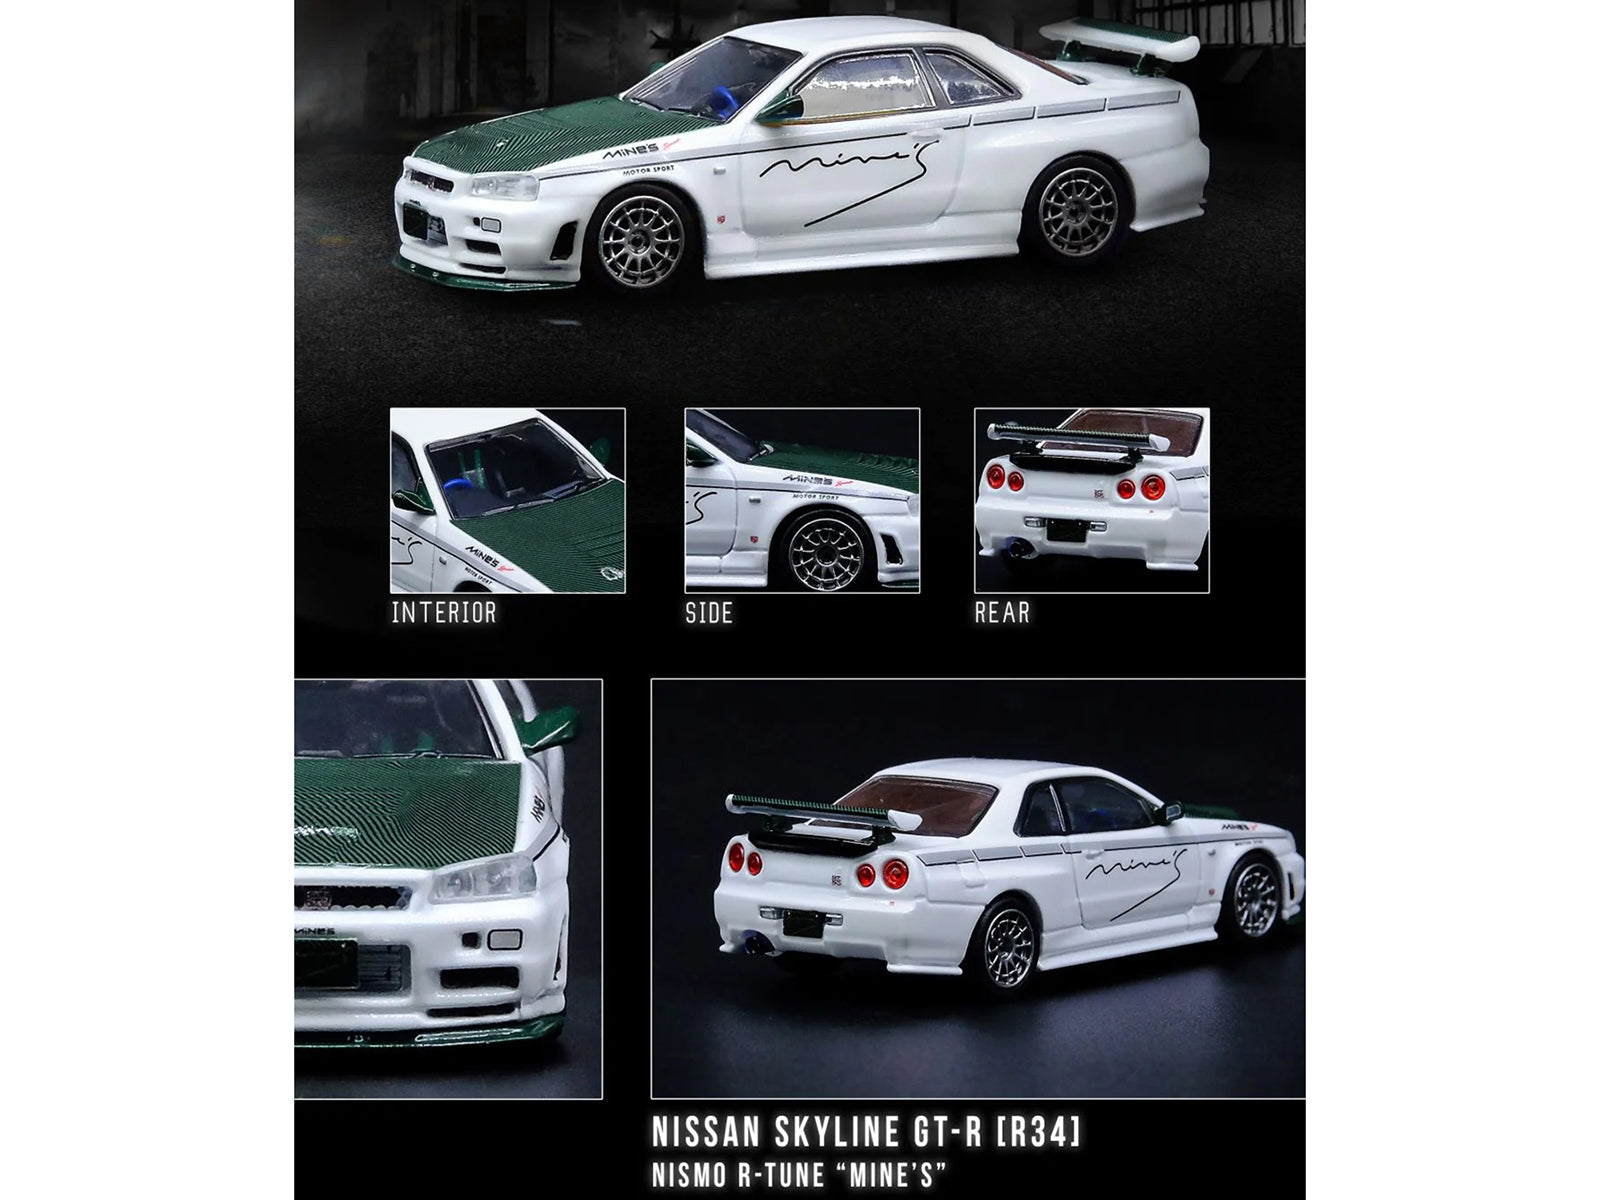 Nissan Skyline GT-R (R34) Nismo R-Tune RHD (Right Hand Drive) White with Green Carbon Hood "Tuned by Mine's" 1/64 Diecast Model Car by Inno Models